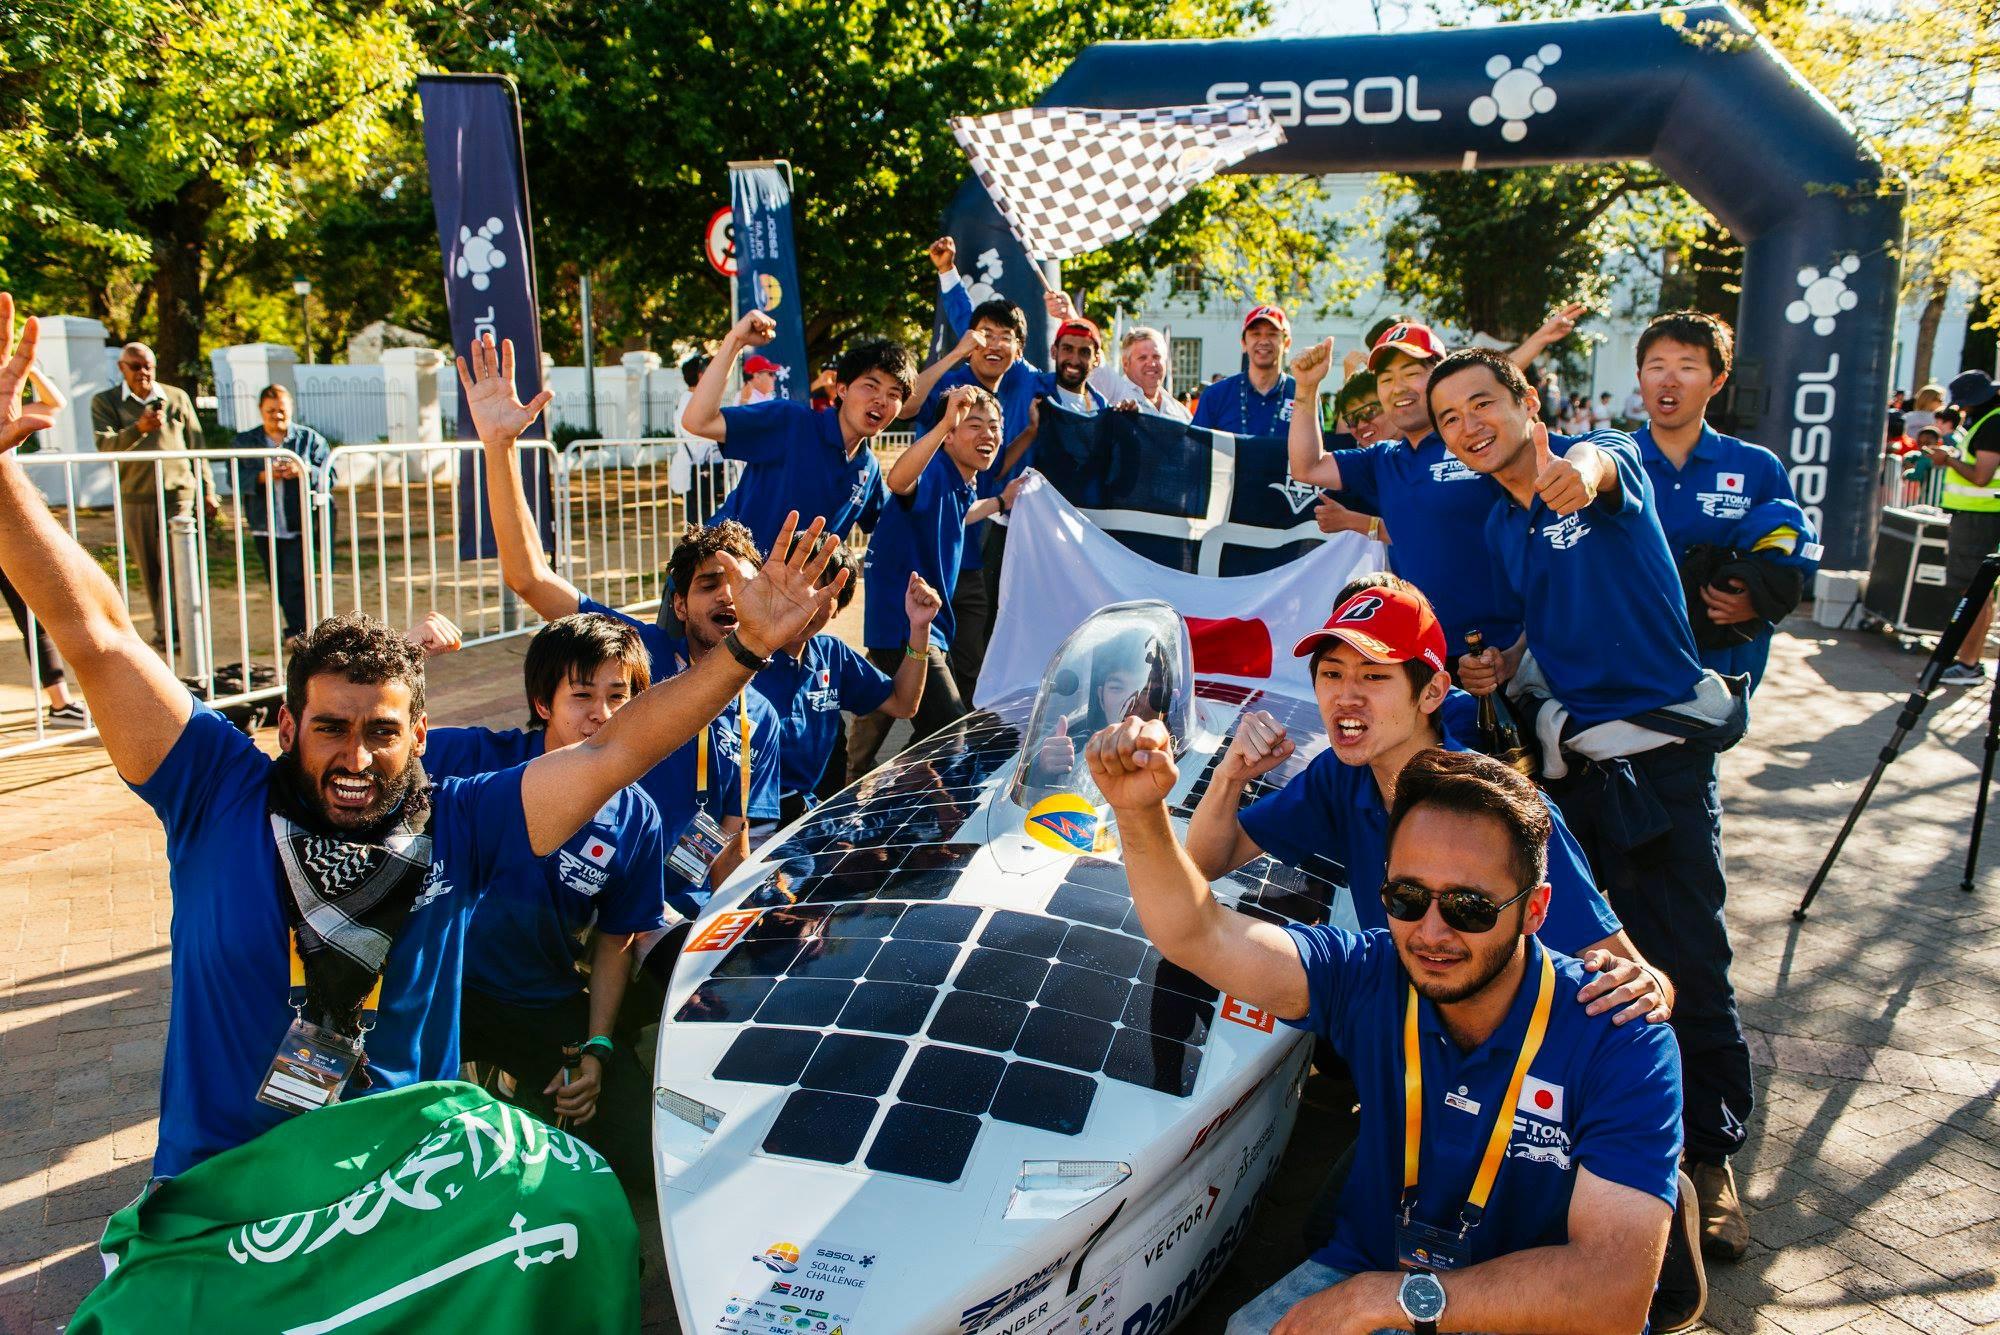 photo: the Tokai University Solar Car Team competing in the Sasol Solar Challenge 2018, South Africa